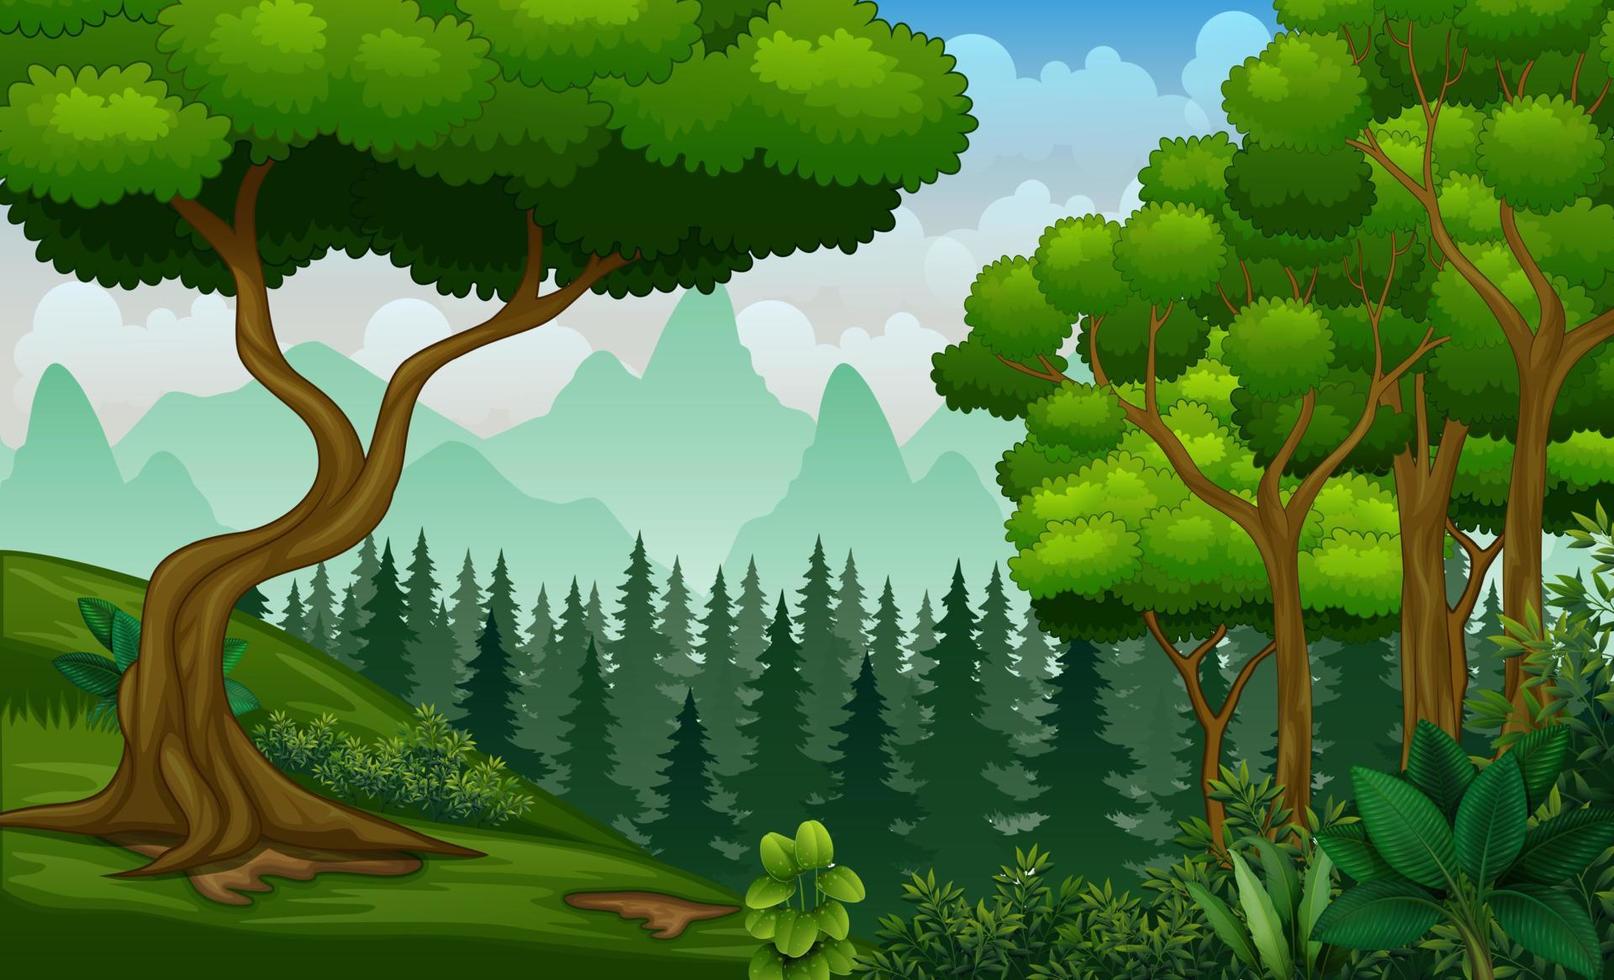 Plant and trees on the nature landscape vector